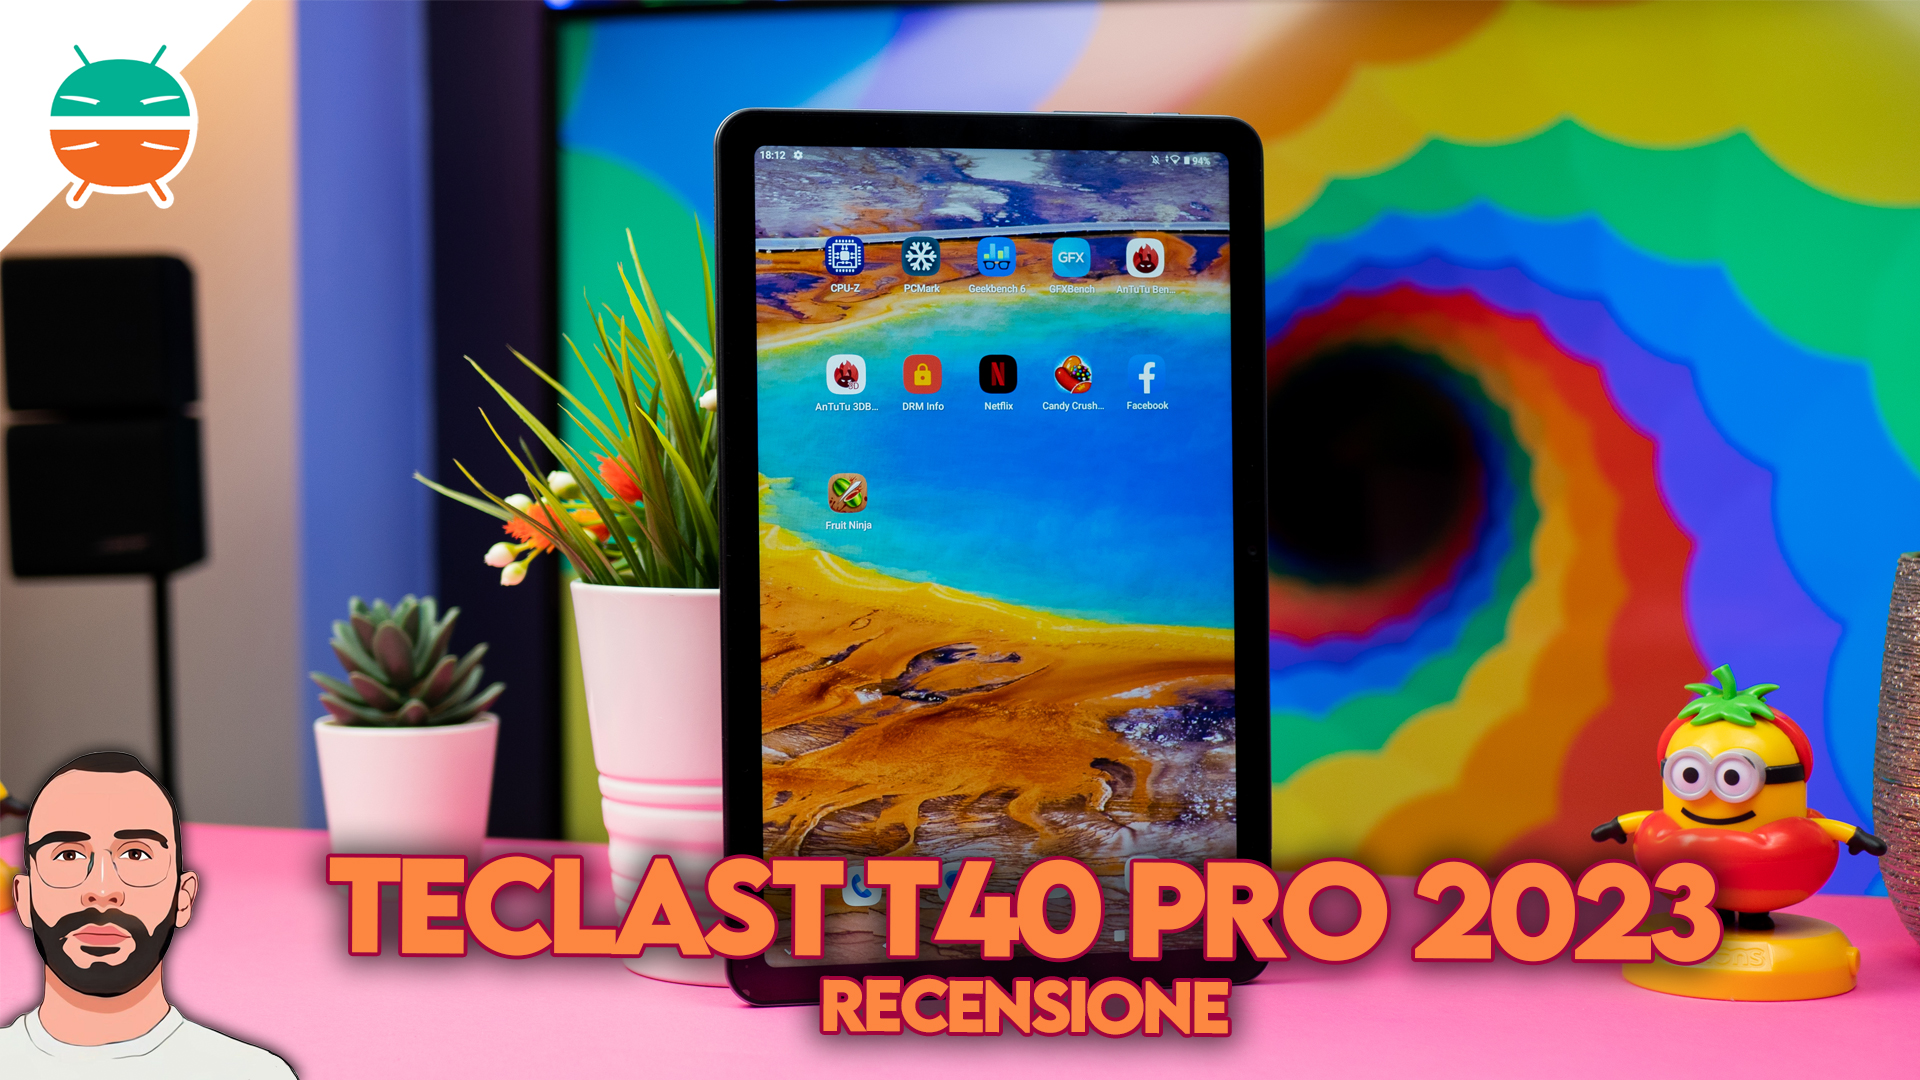 Teclast T40 PRO 2023 review: Android 12 and renewed CPU! - GizChina.it